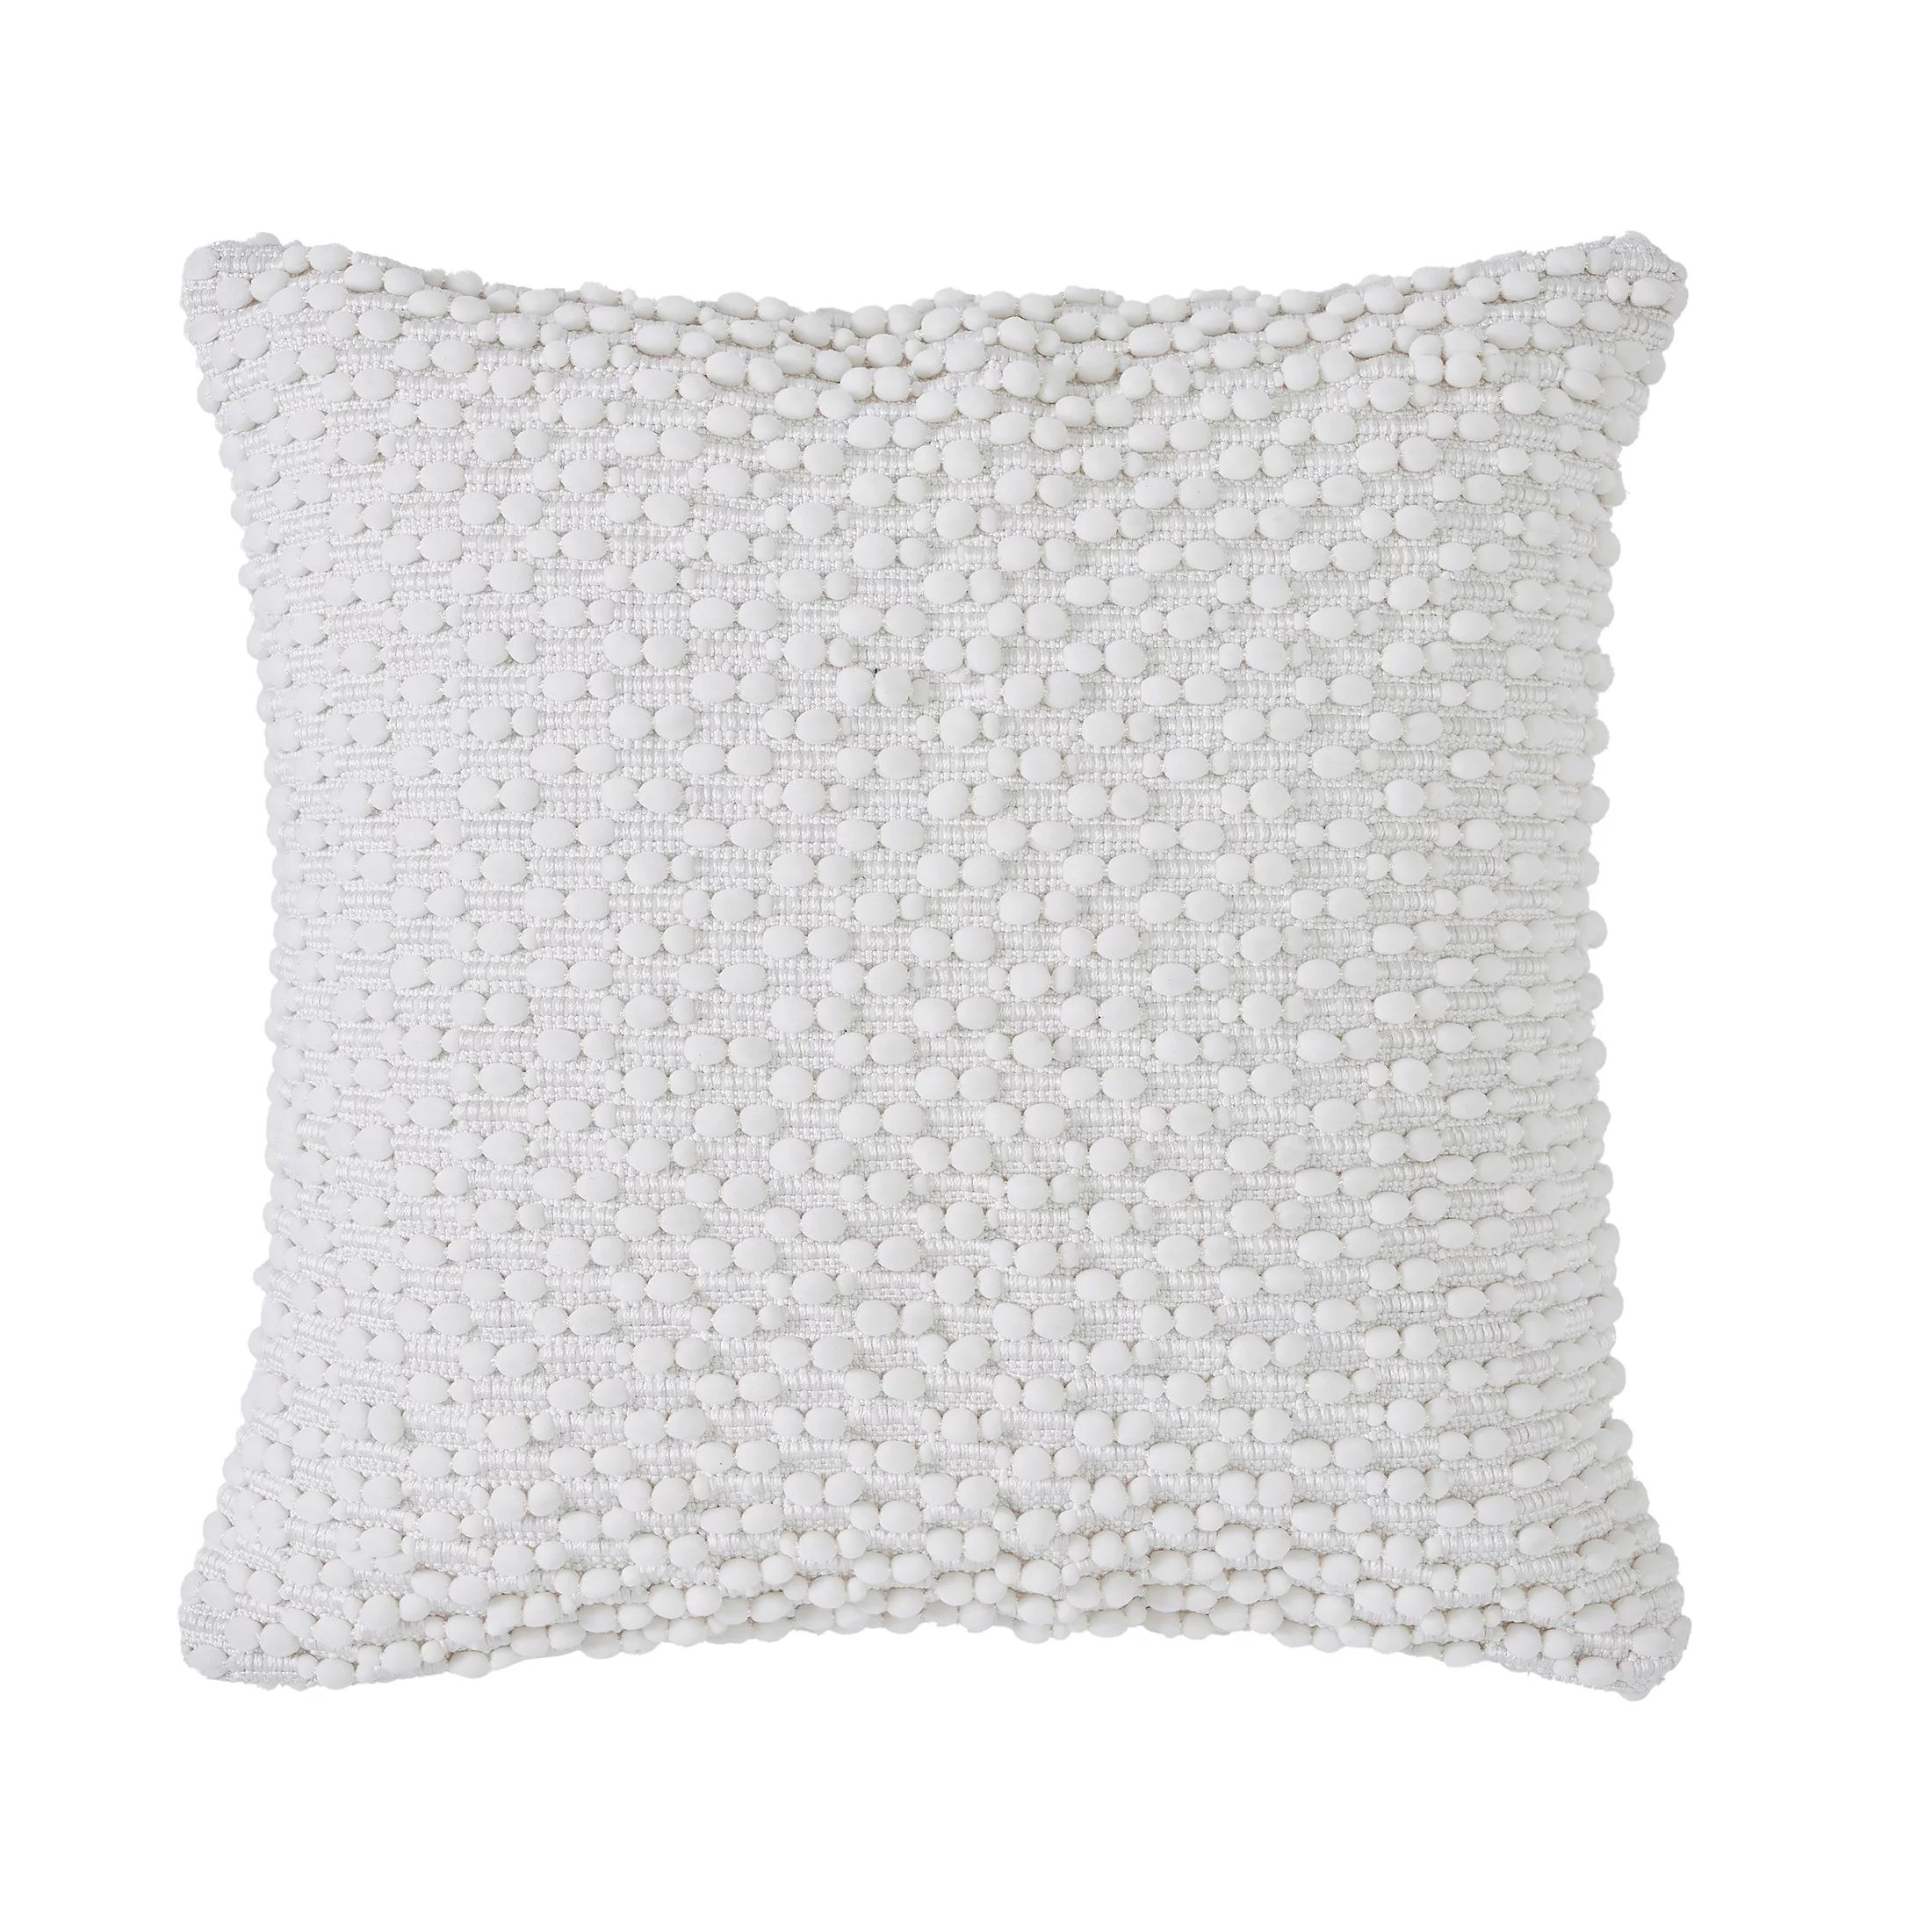 My Texas House Phoebe Textured Cotton Decorative Pillow Cover, 20"x20", Ivory | Walmart (US)